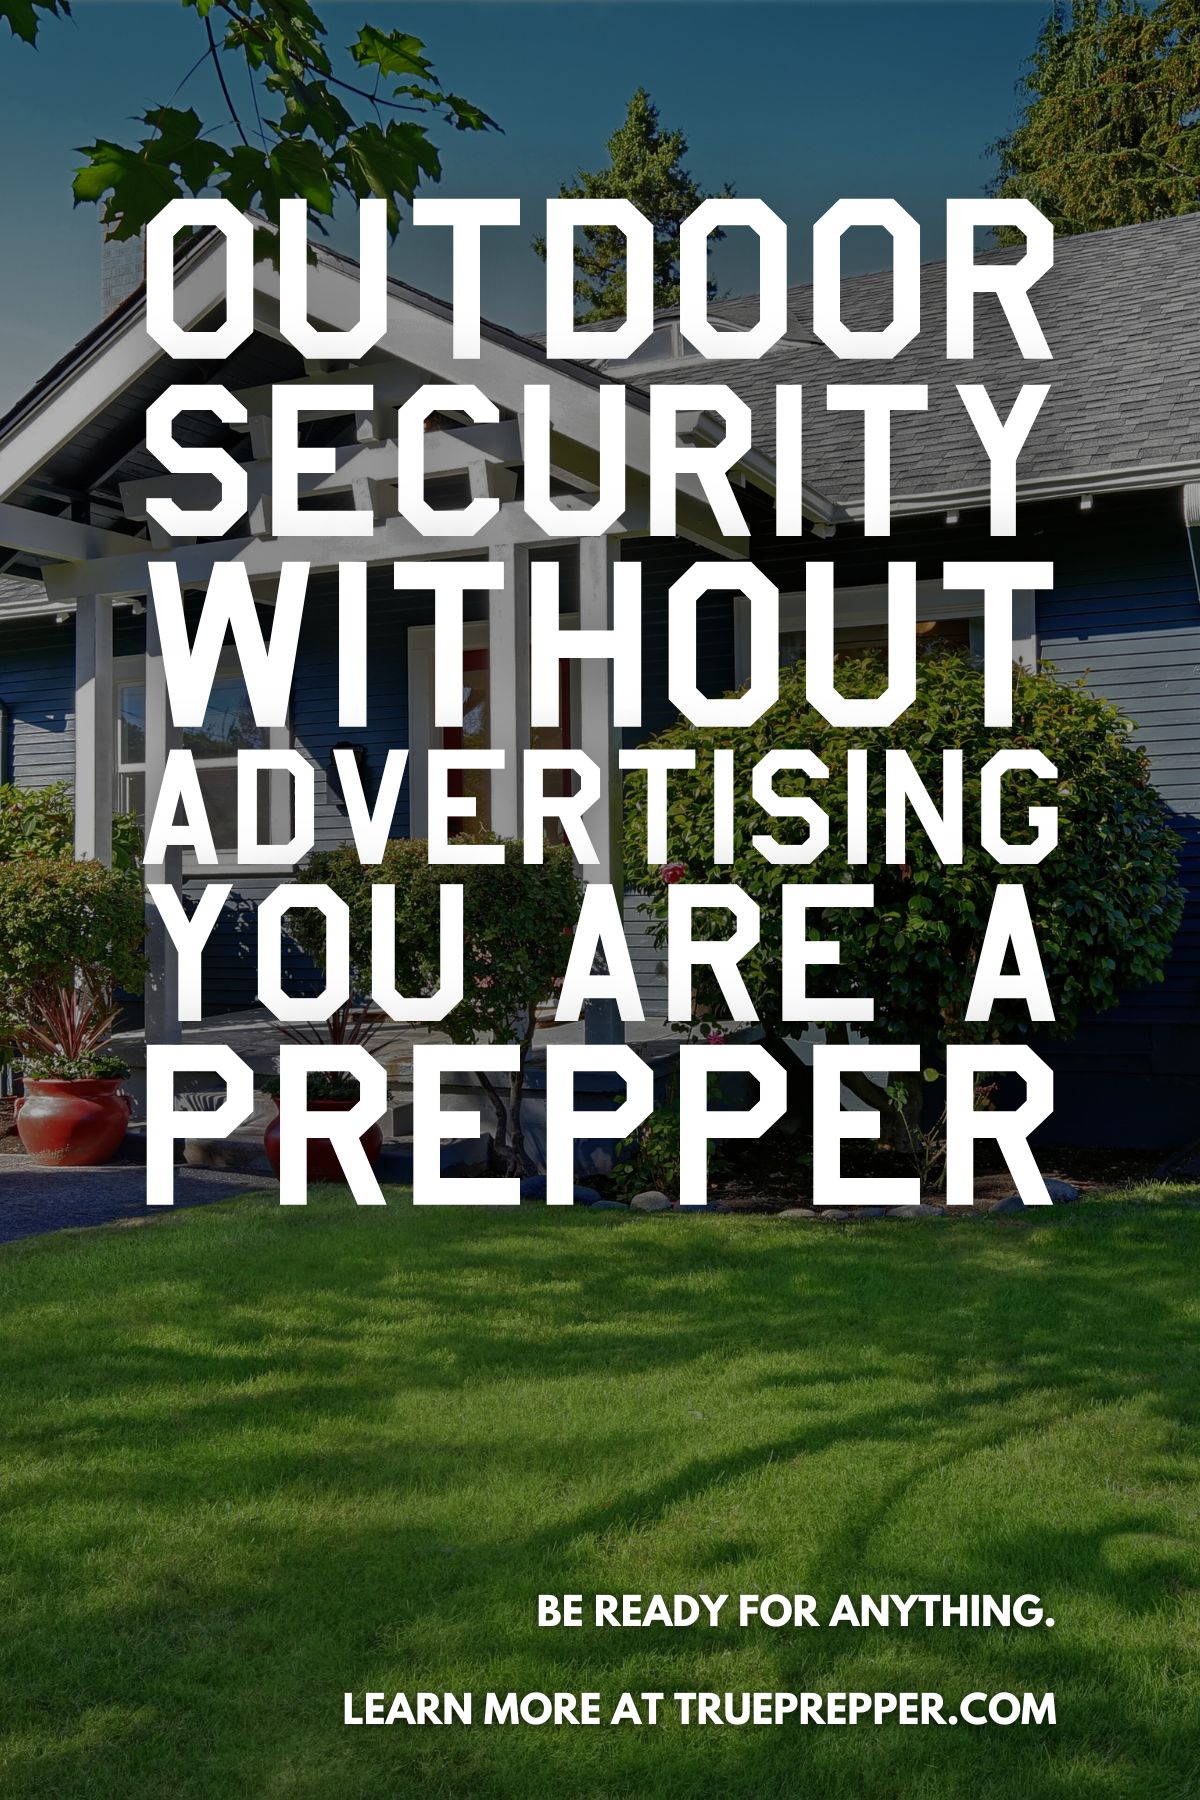 Outdoor Security Without Advertising You Are a Prepper